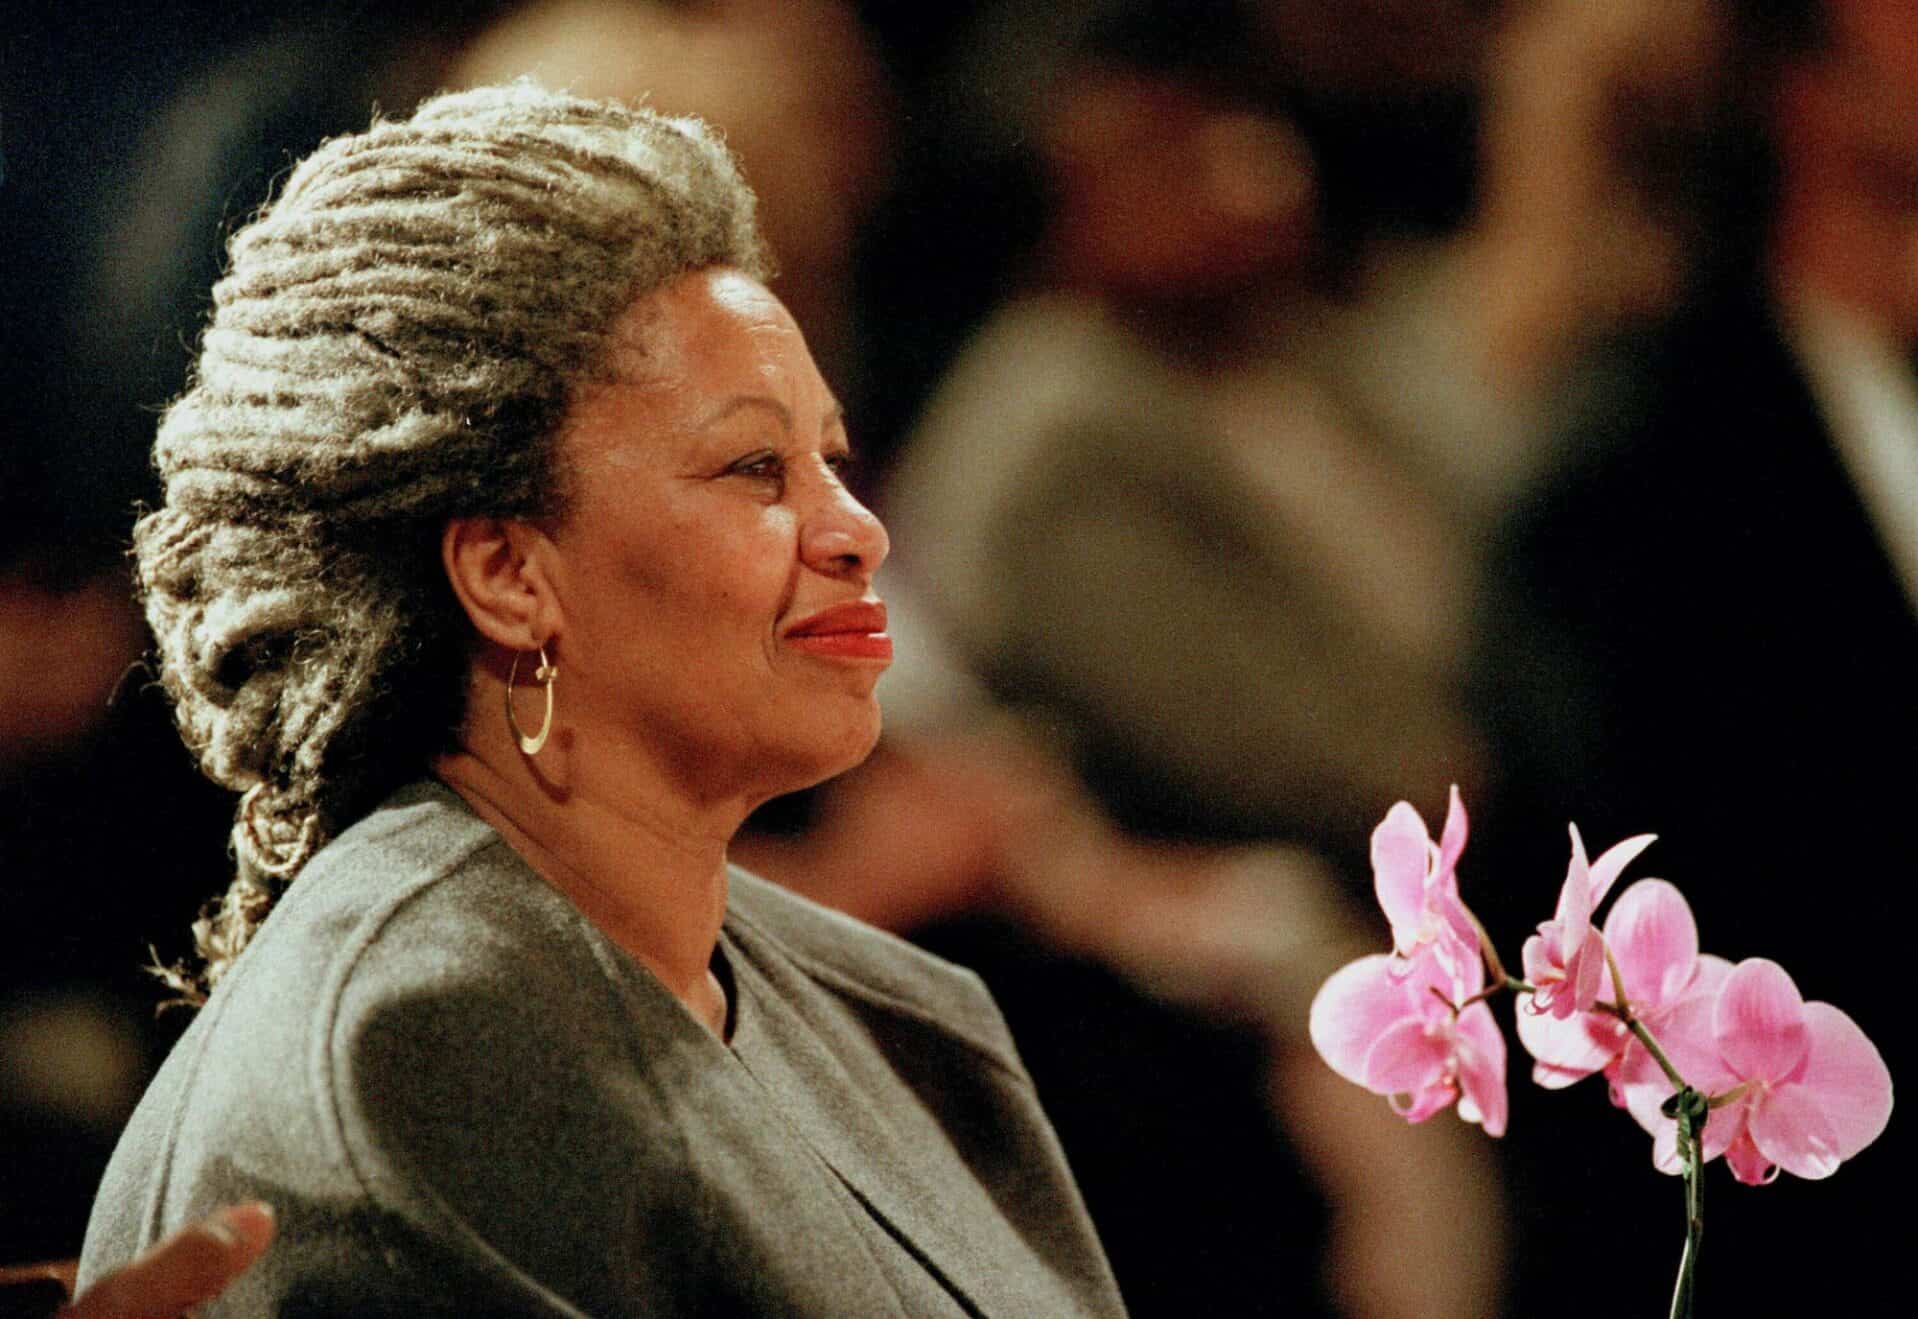 Toni Morrison faced some controversies